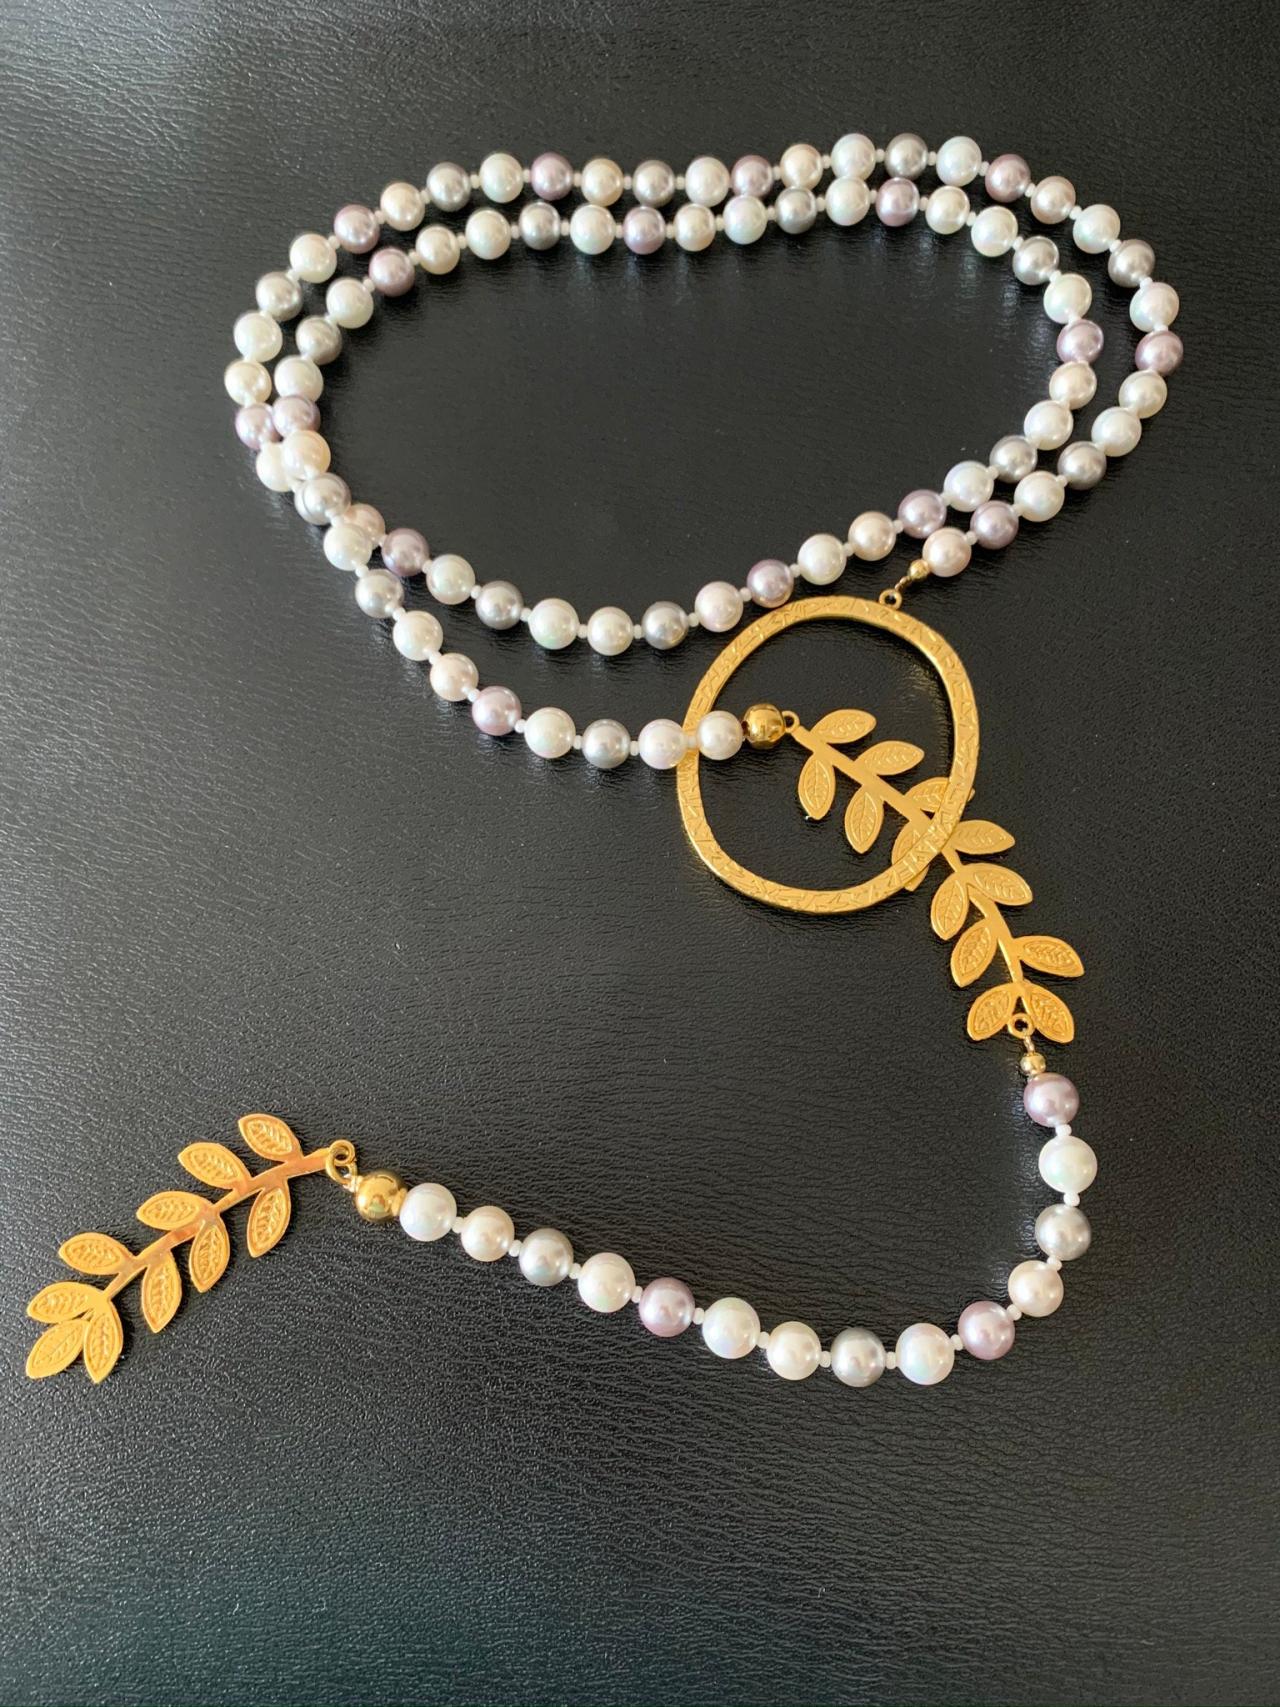 Handmade Shell Pearls Necklace 24 K Gold Plated - Earrings Included